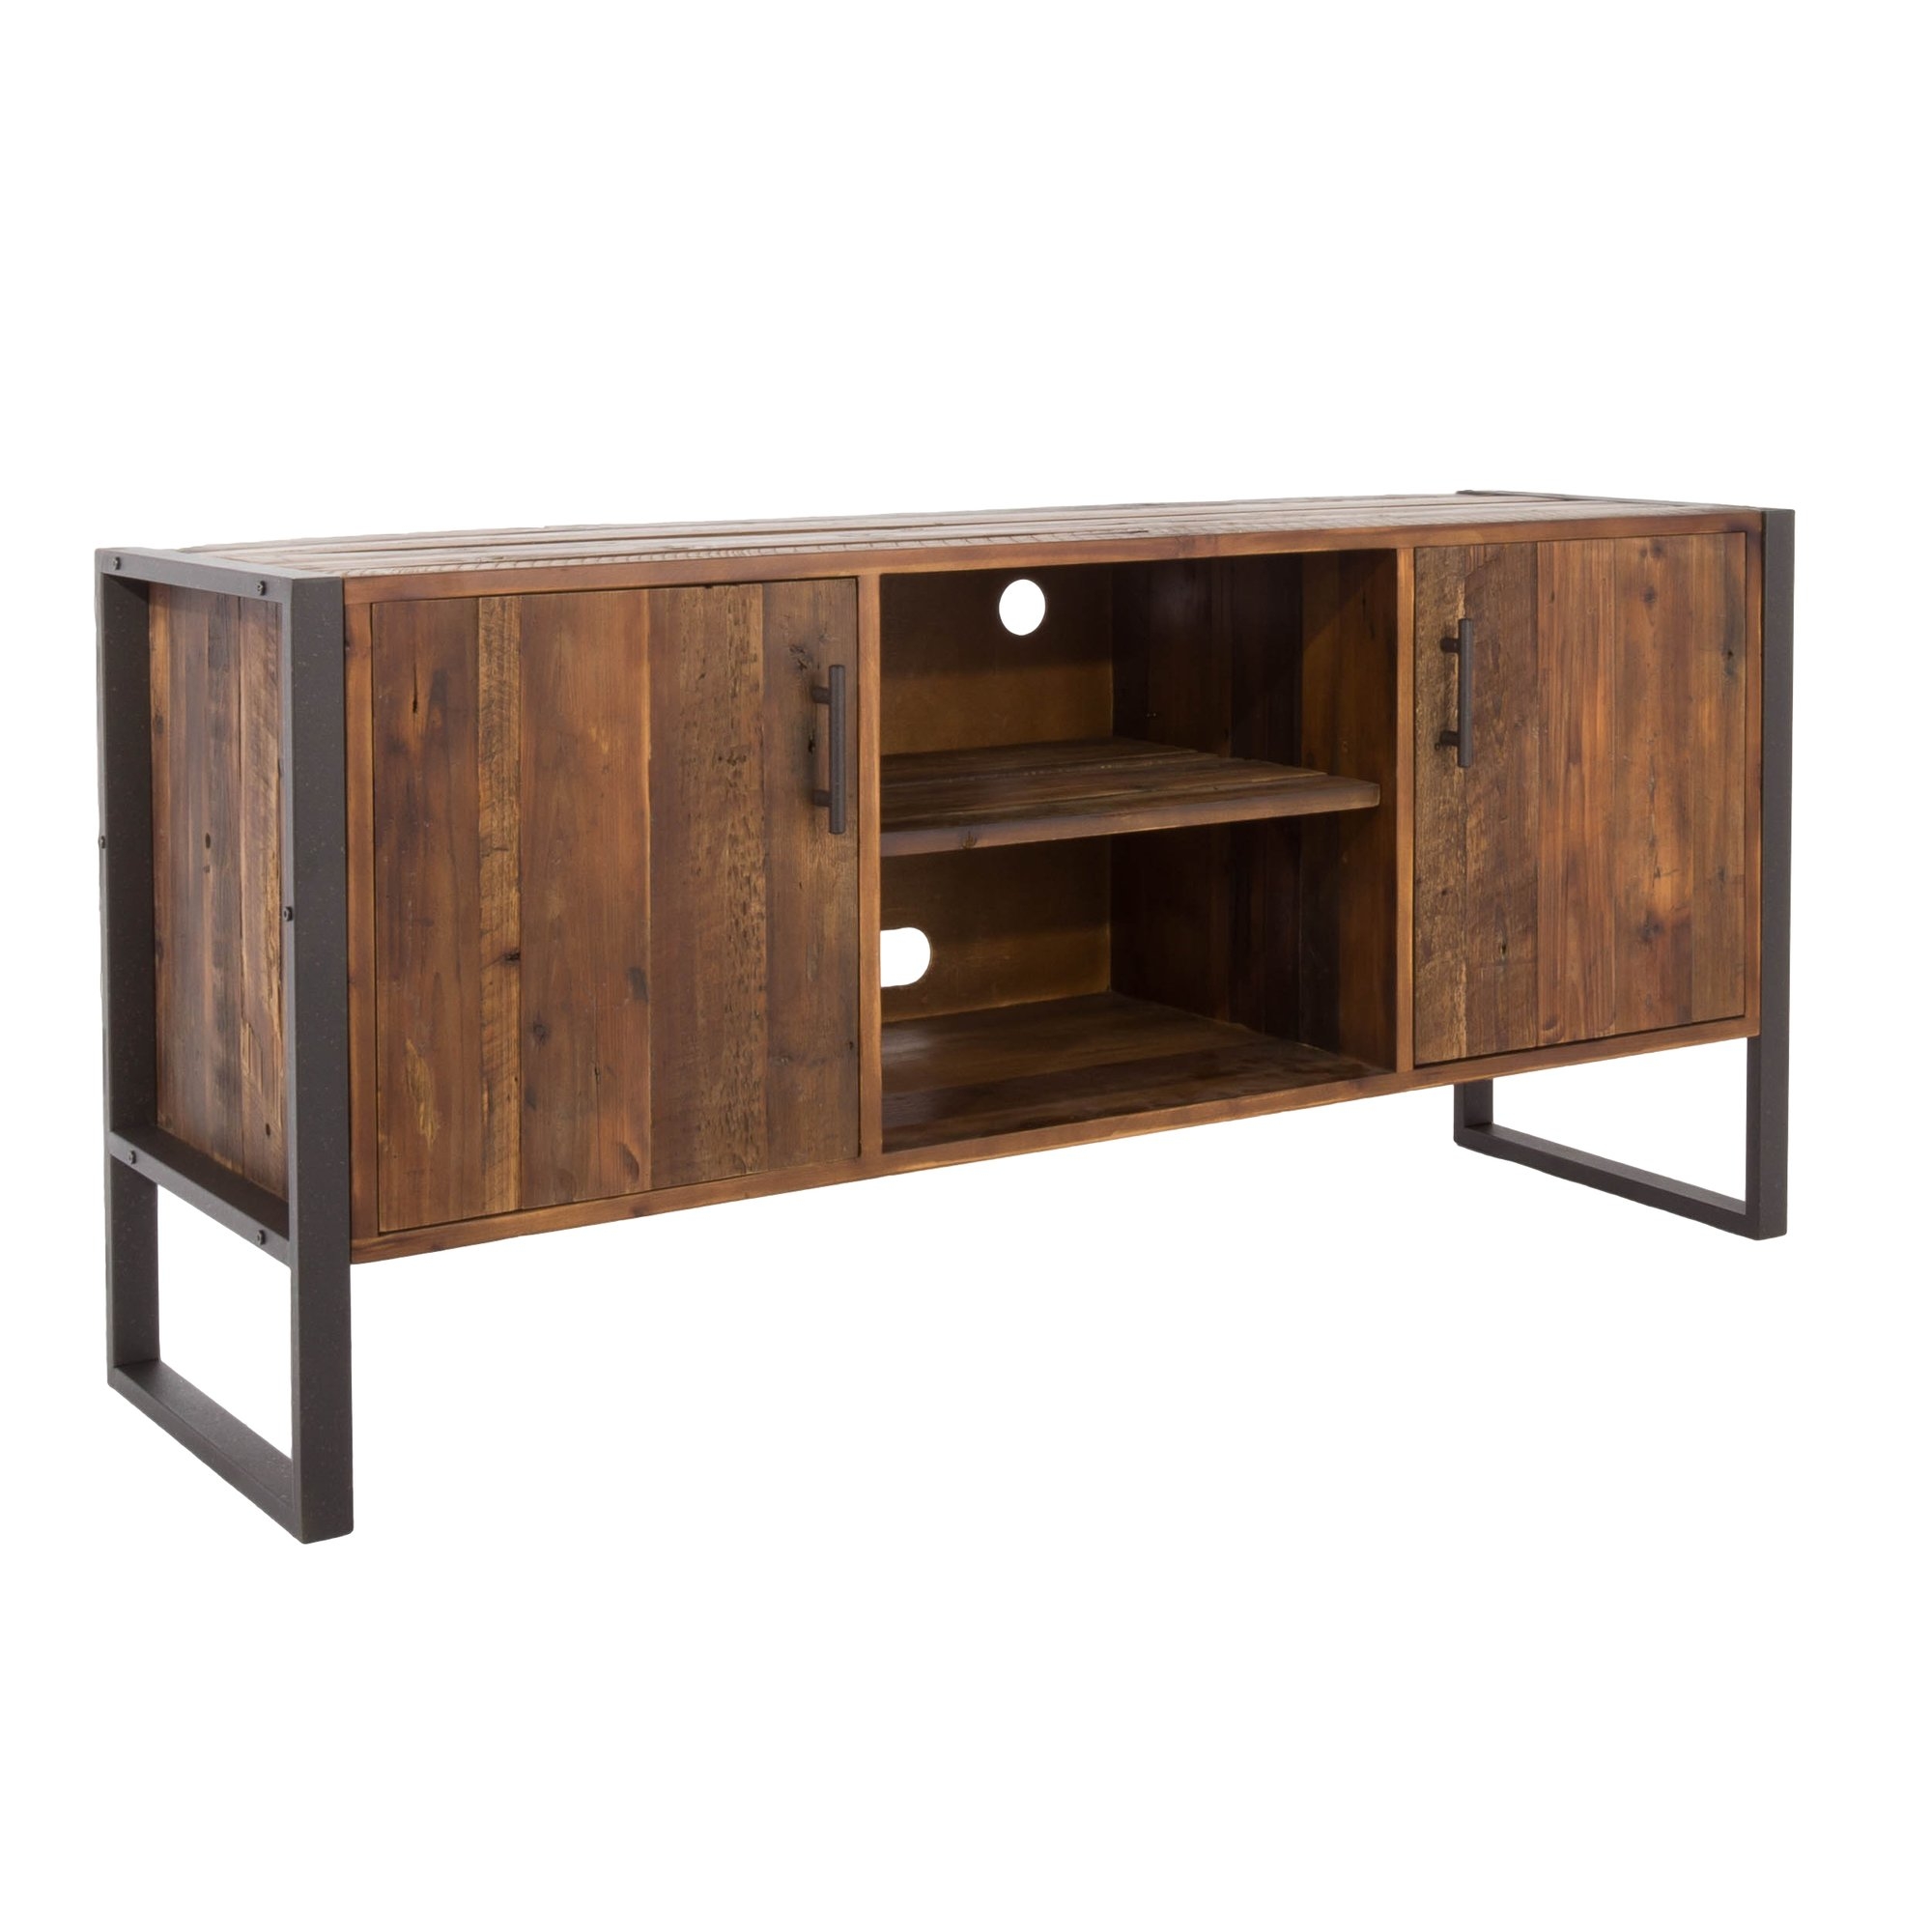 "Rochester TV Stand" - Image 1